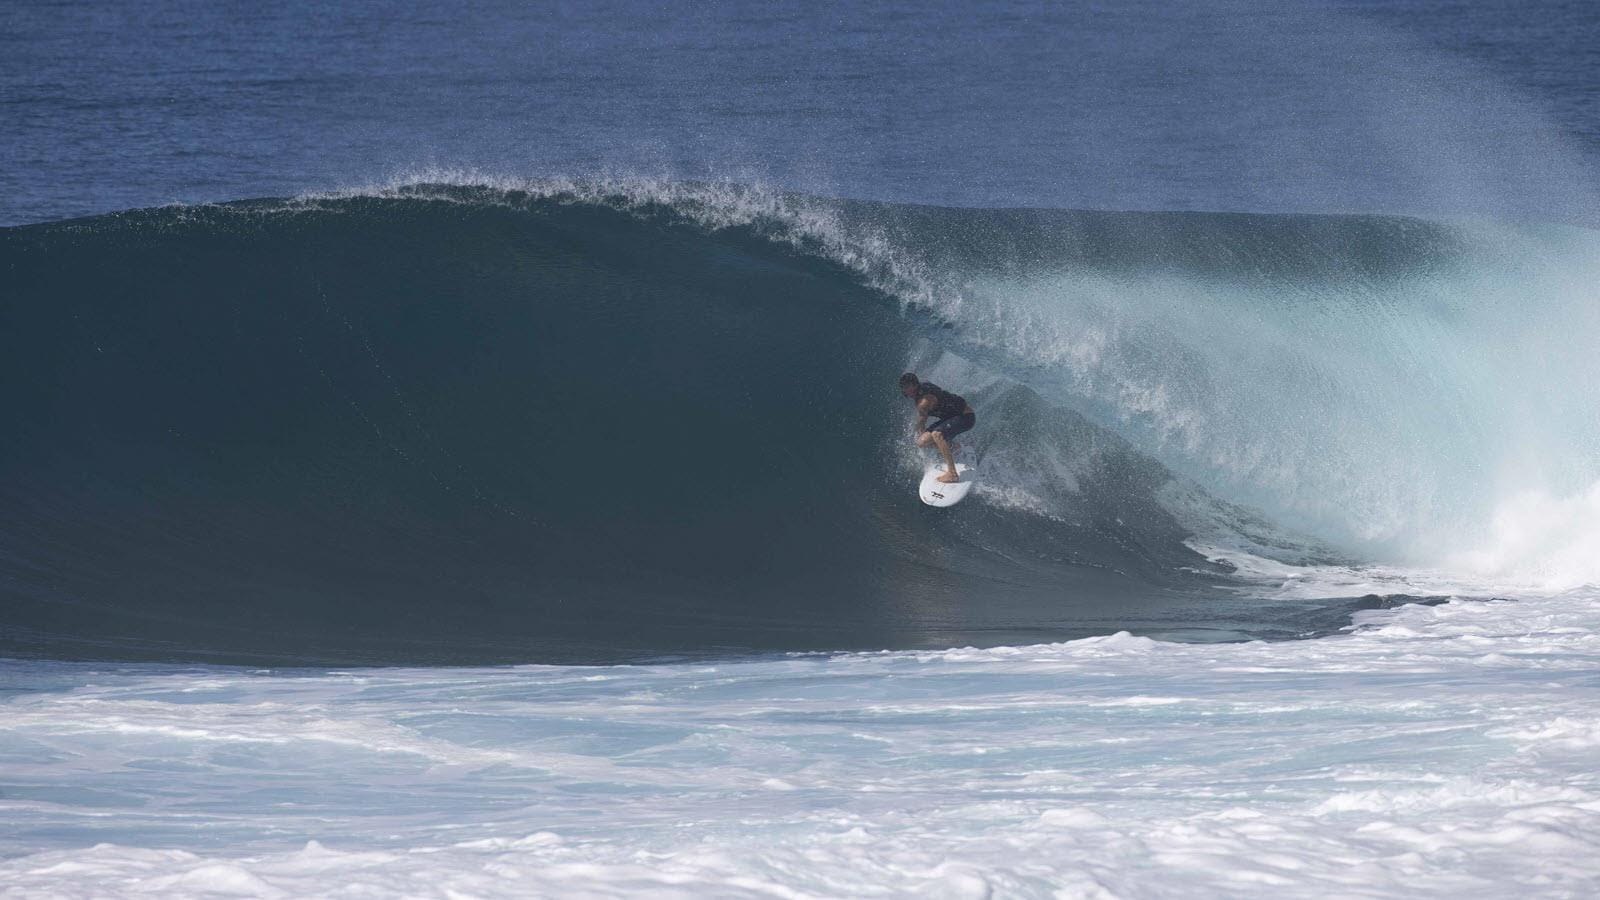 Surfer Arran Strong in the curl of a wave in Hawaii